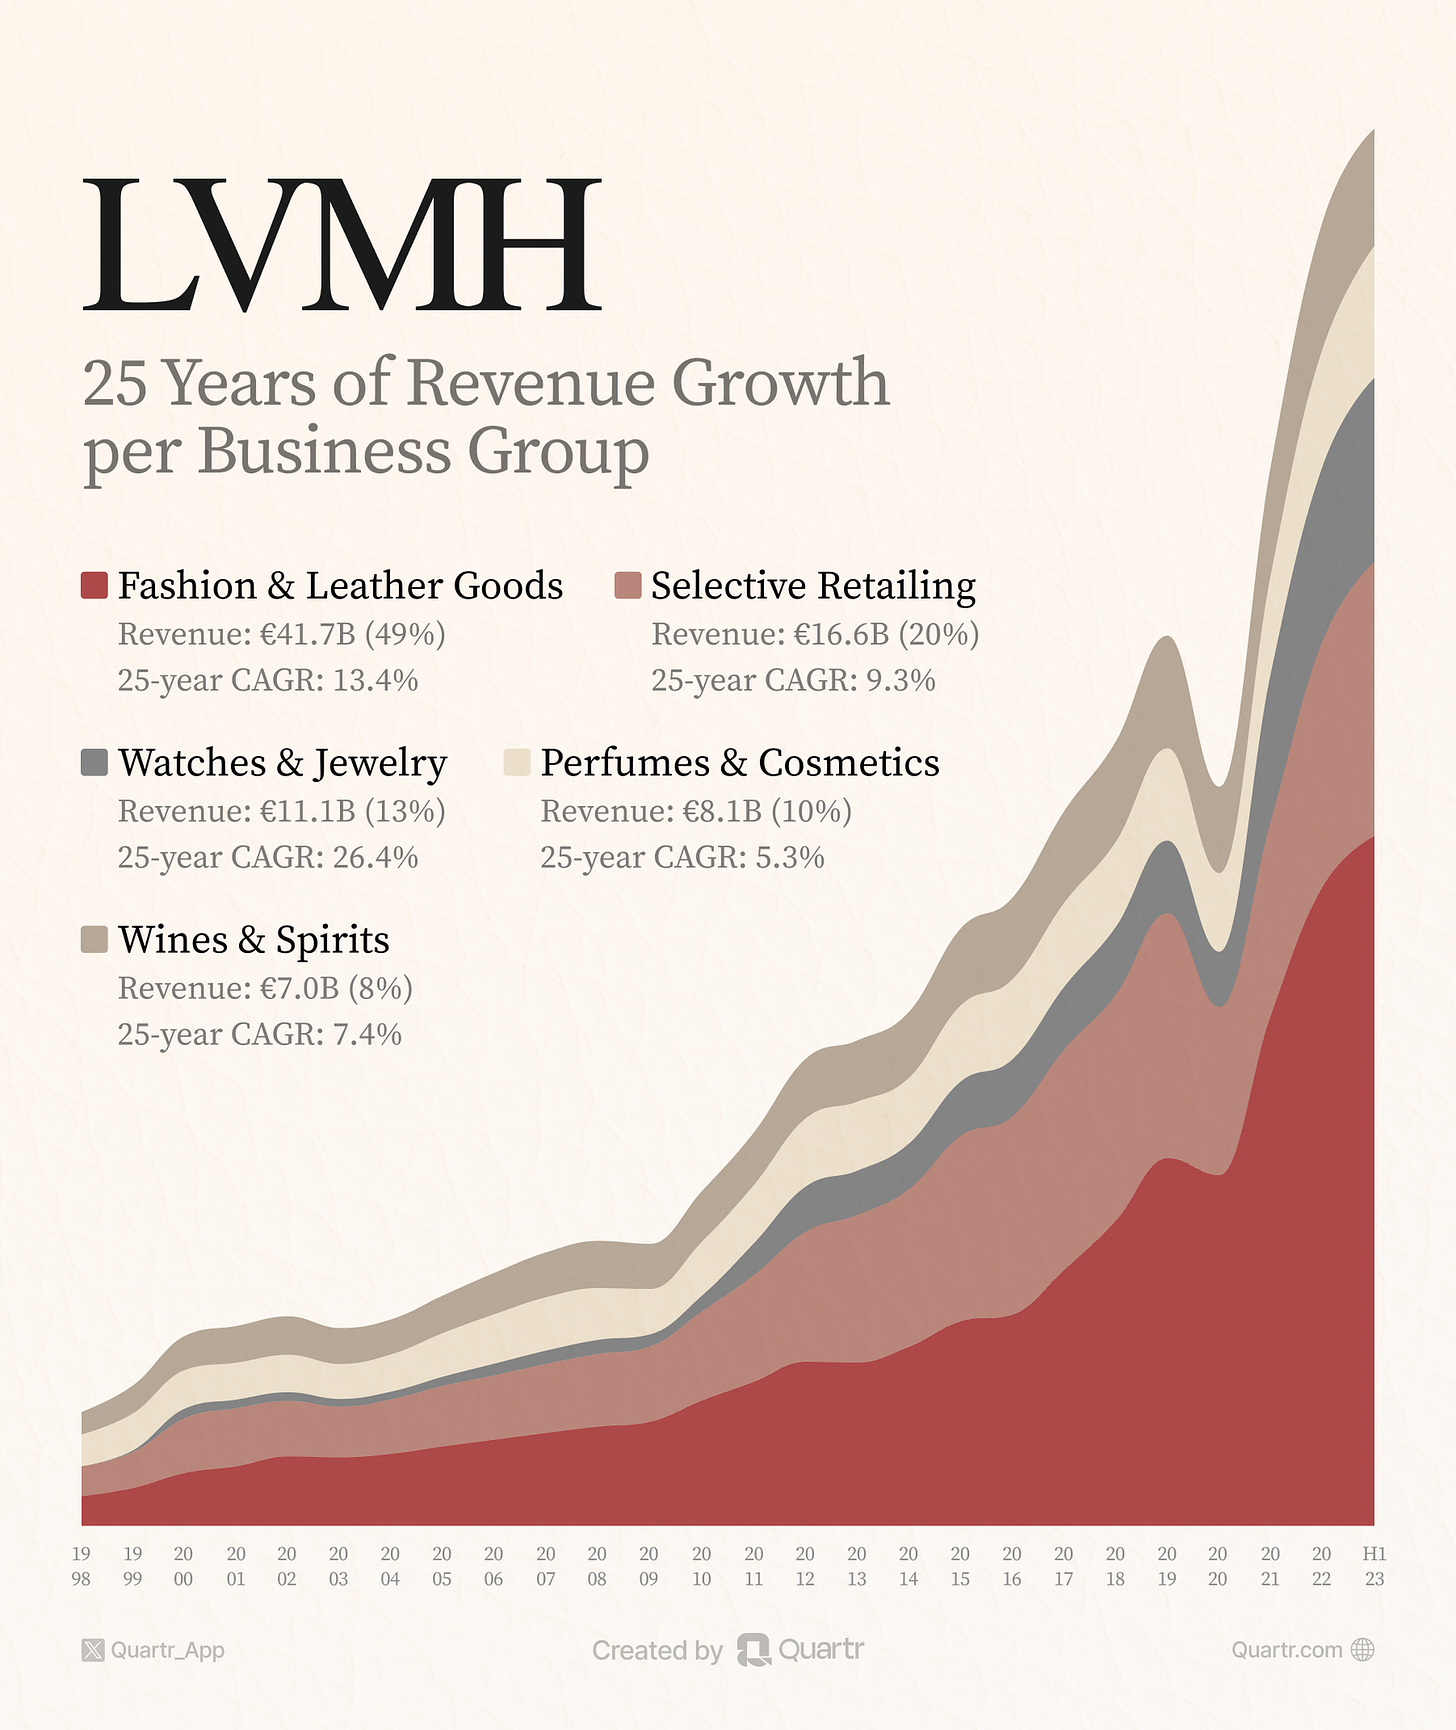 A chart covering 25 years of LVMH's revenue growth segmented by business group.